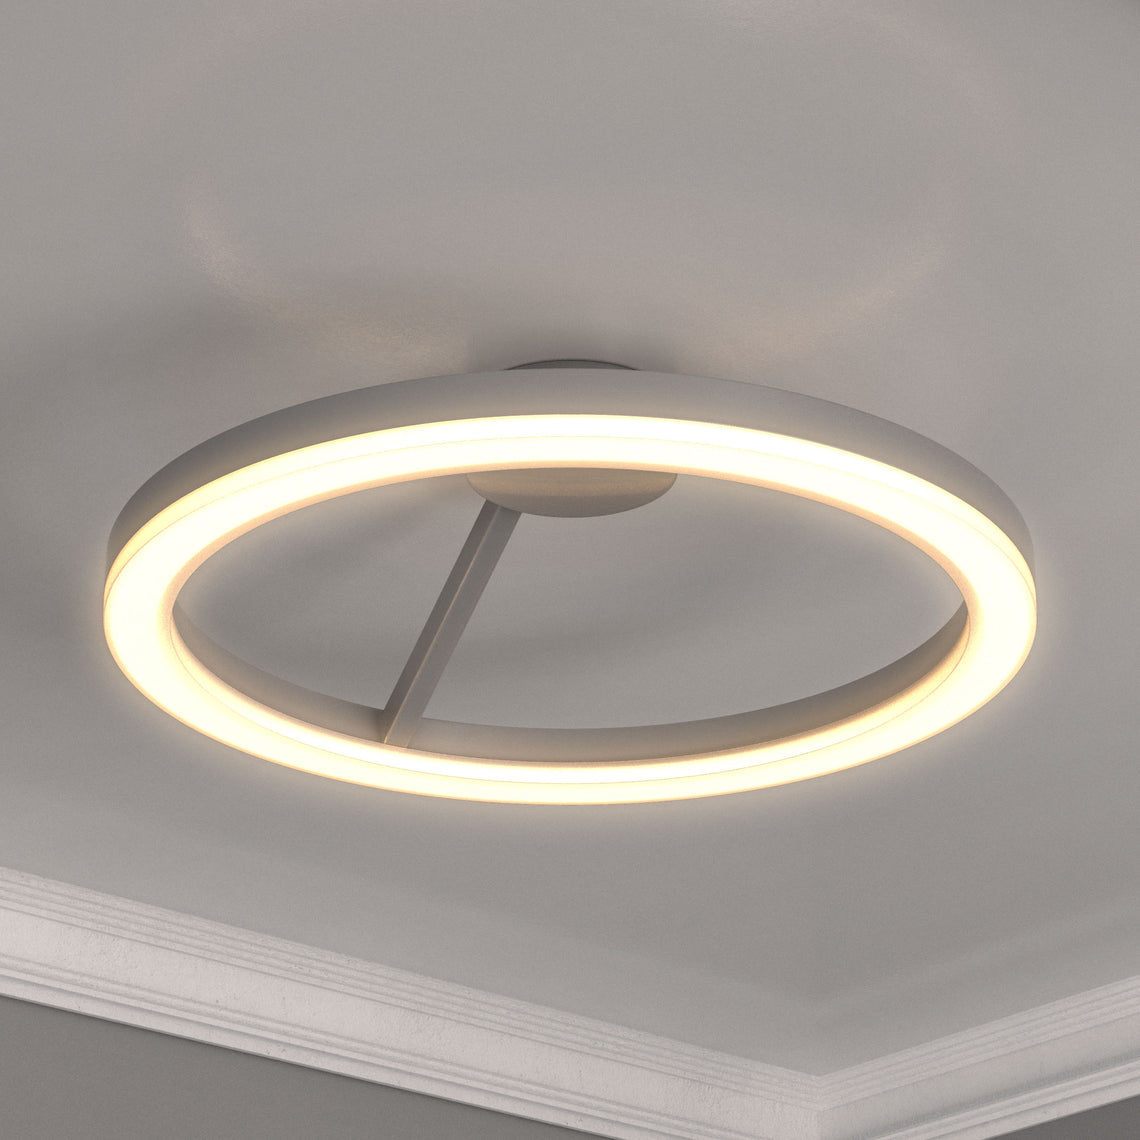 Ceiling Lamp - Circle Shade Led Round Shade Ceiling Lights for Bedroom Hallway -  31W - 3000K - 1285LM - Simple Close to Ceiling Fixtures - Dimmable - Aluminum Body Finish